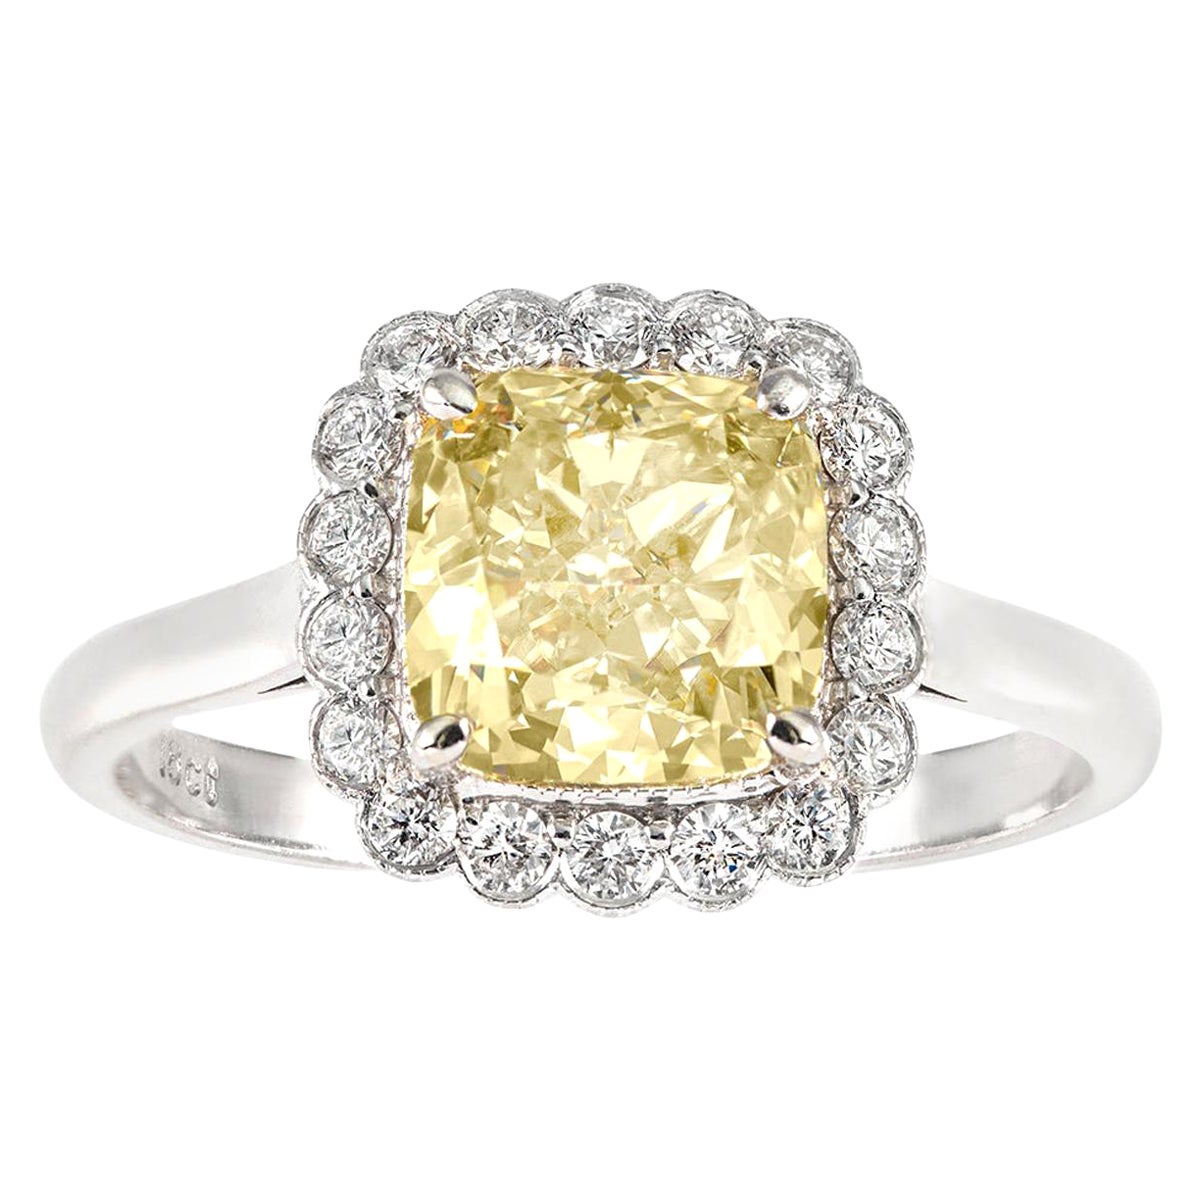 Fancy Intense Yellow Cushion Cut Diamond in Diamond Scalloped Cluster Ring 18ct For Sale